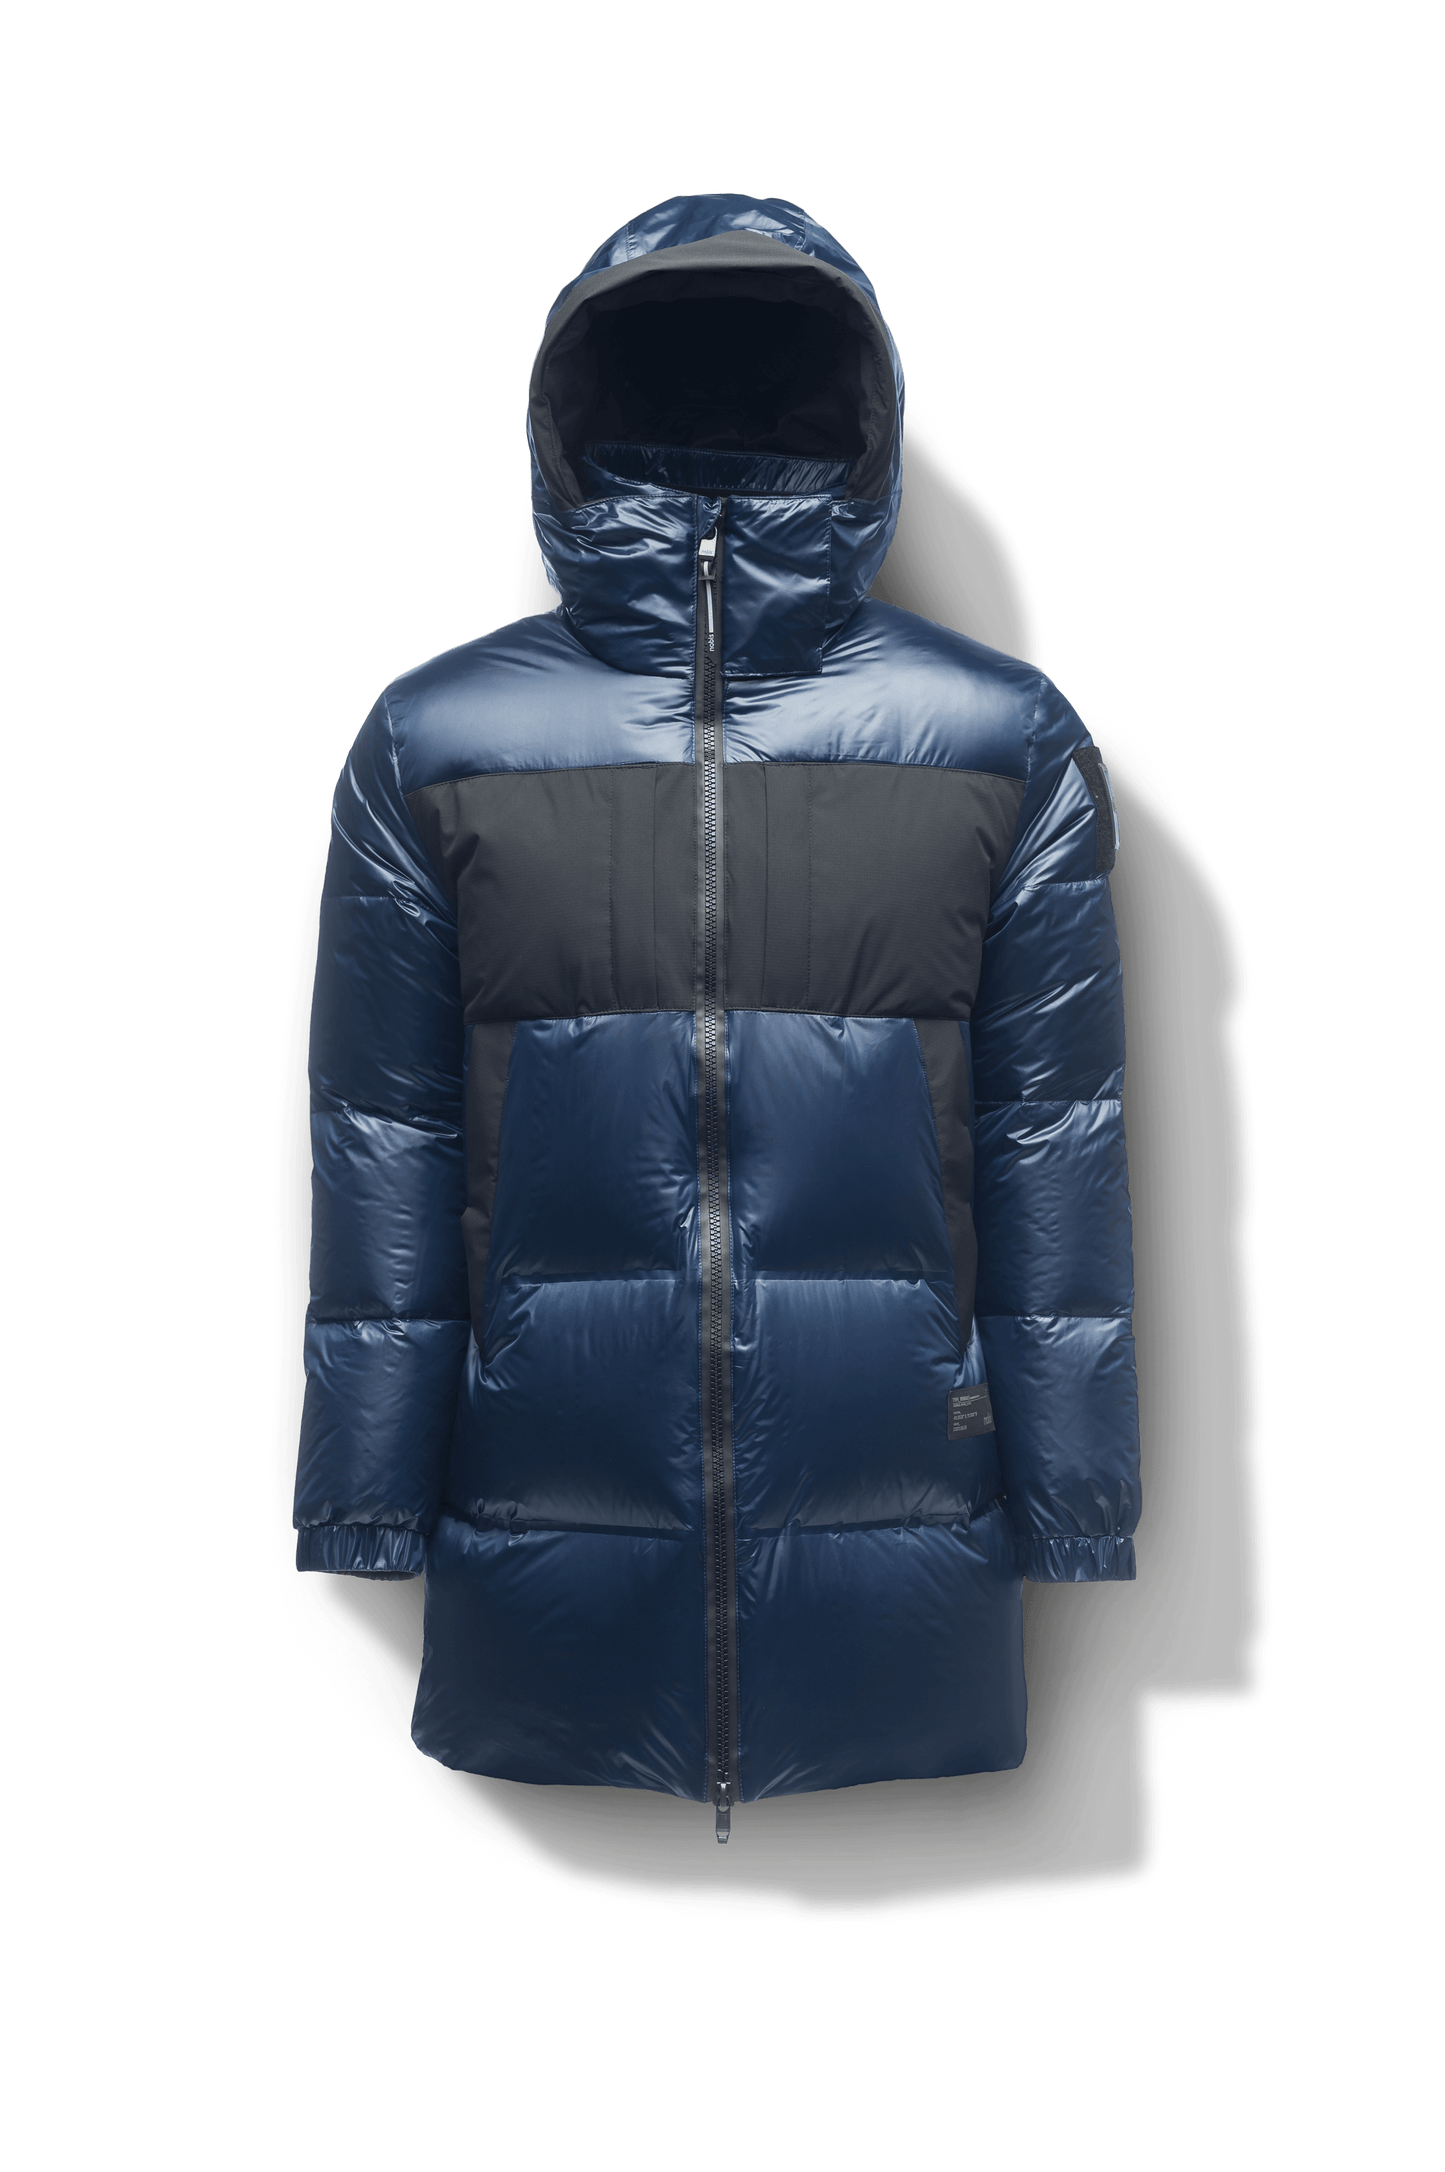 Neelix Men's Long Puffer Jacket in thigh length, premium cire technical nylon taffeta and stretch ripstop fabrication, Premium Canadian origin White Duck Down insulation, non-removable down-filled hood, two-way centre-front zipper, pit zipper vents, hidden chest zipper pockets, fleece-lined magnetic closure waist pockets, in Marine